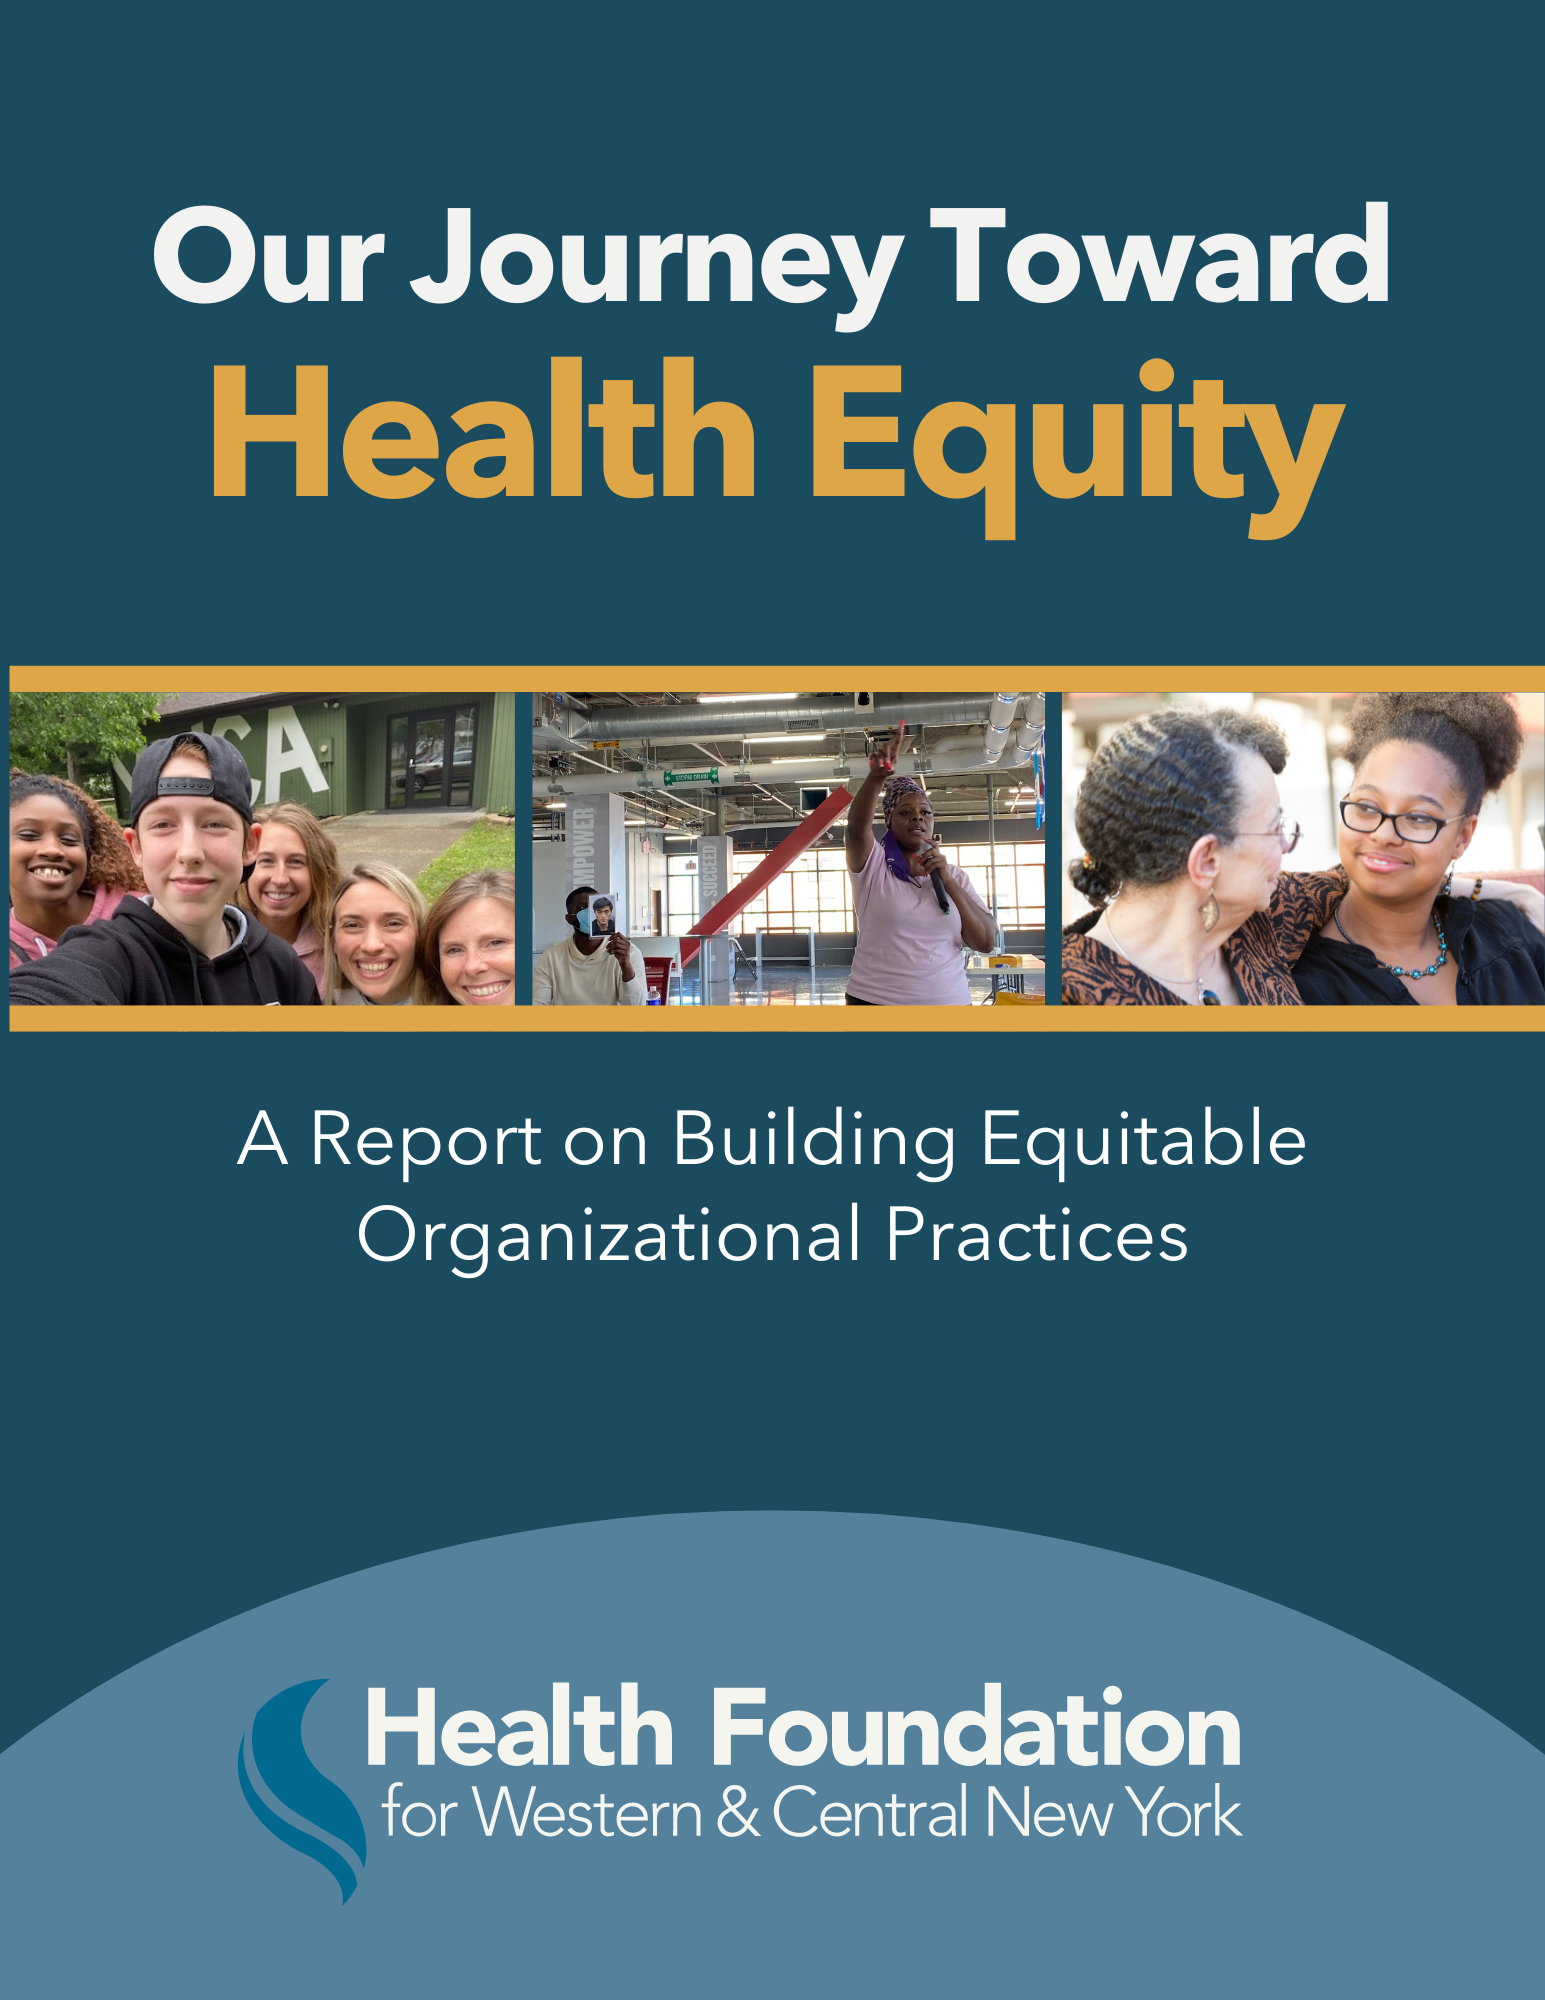 Our Journey Toward Health Equity Report